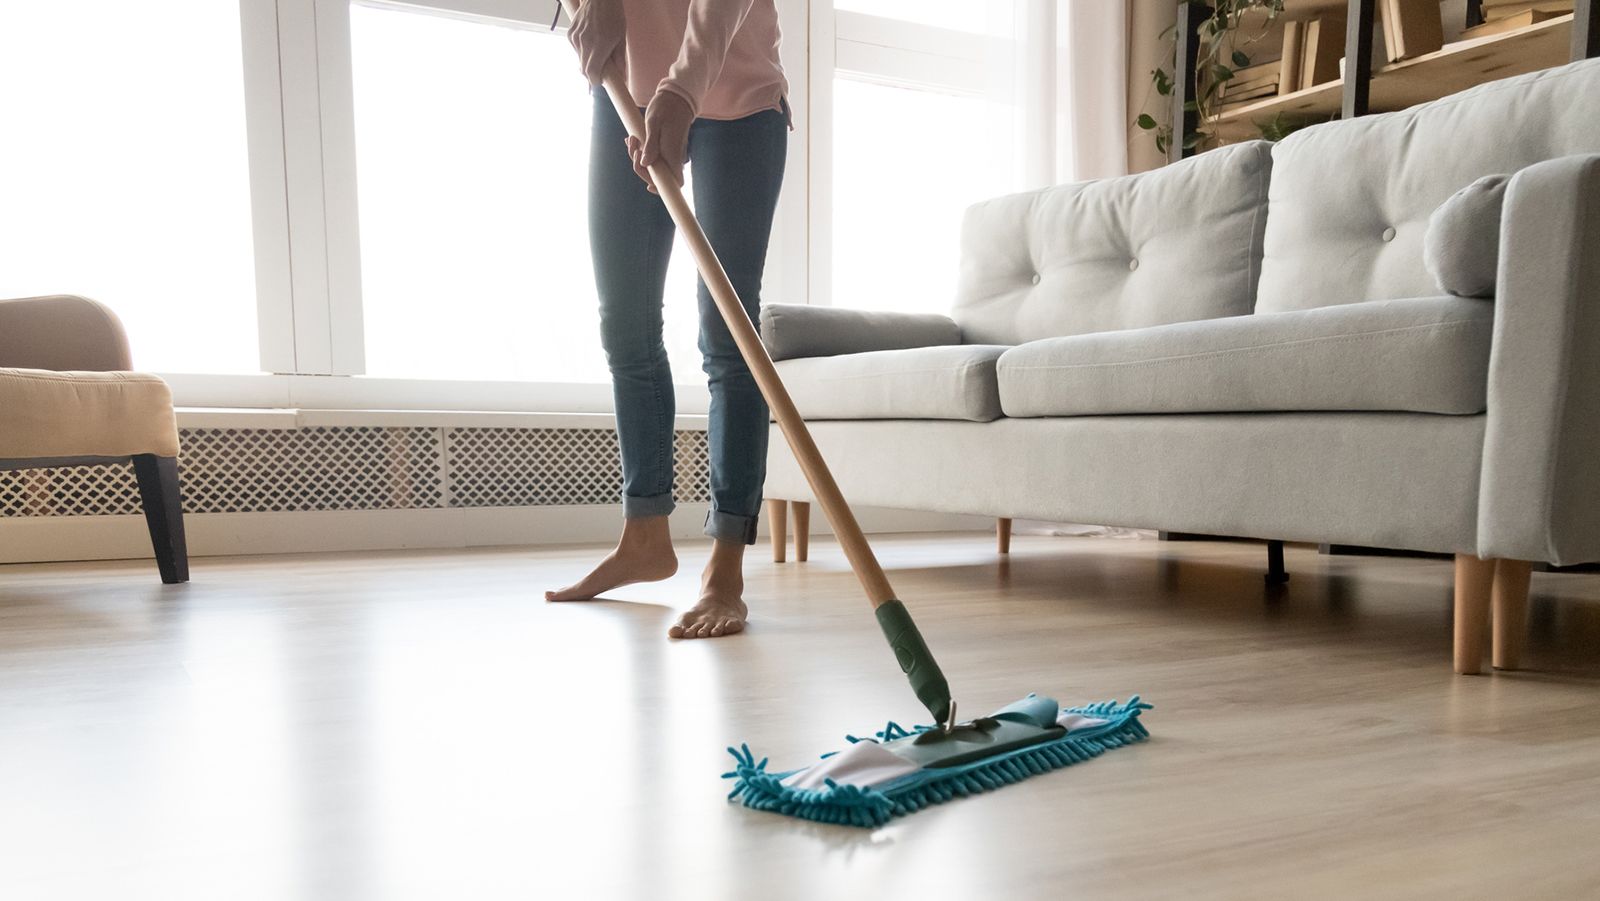 How to clean hardwood floors for a scuff-free polish